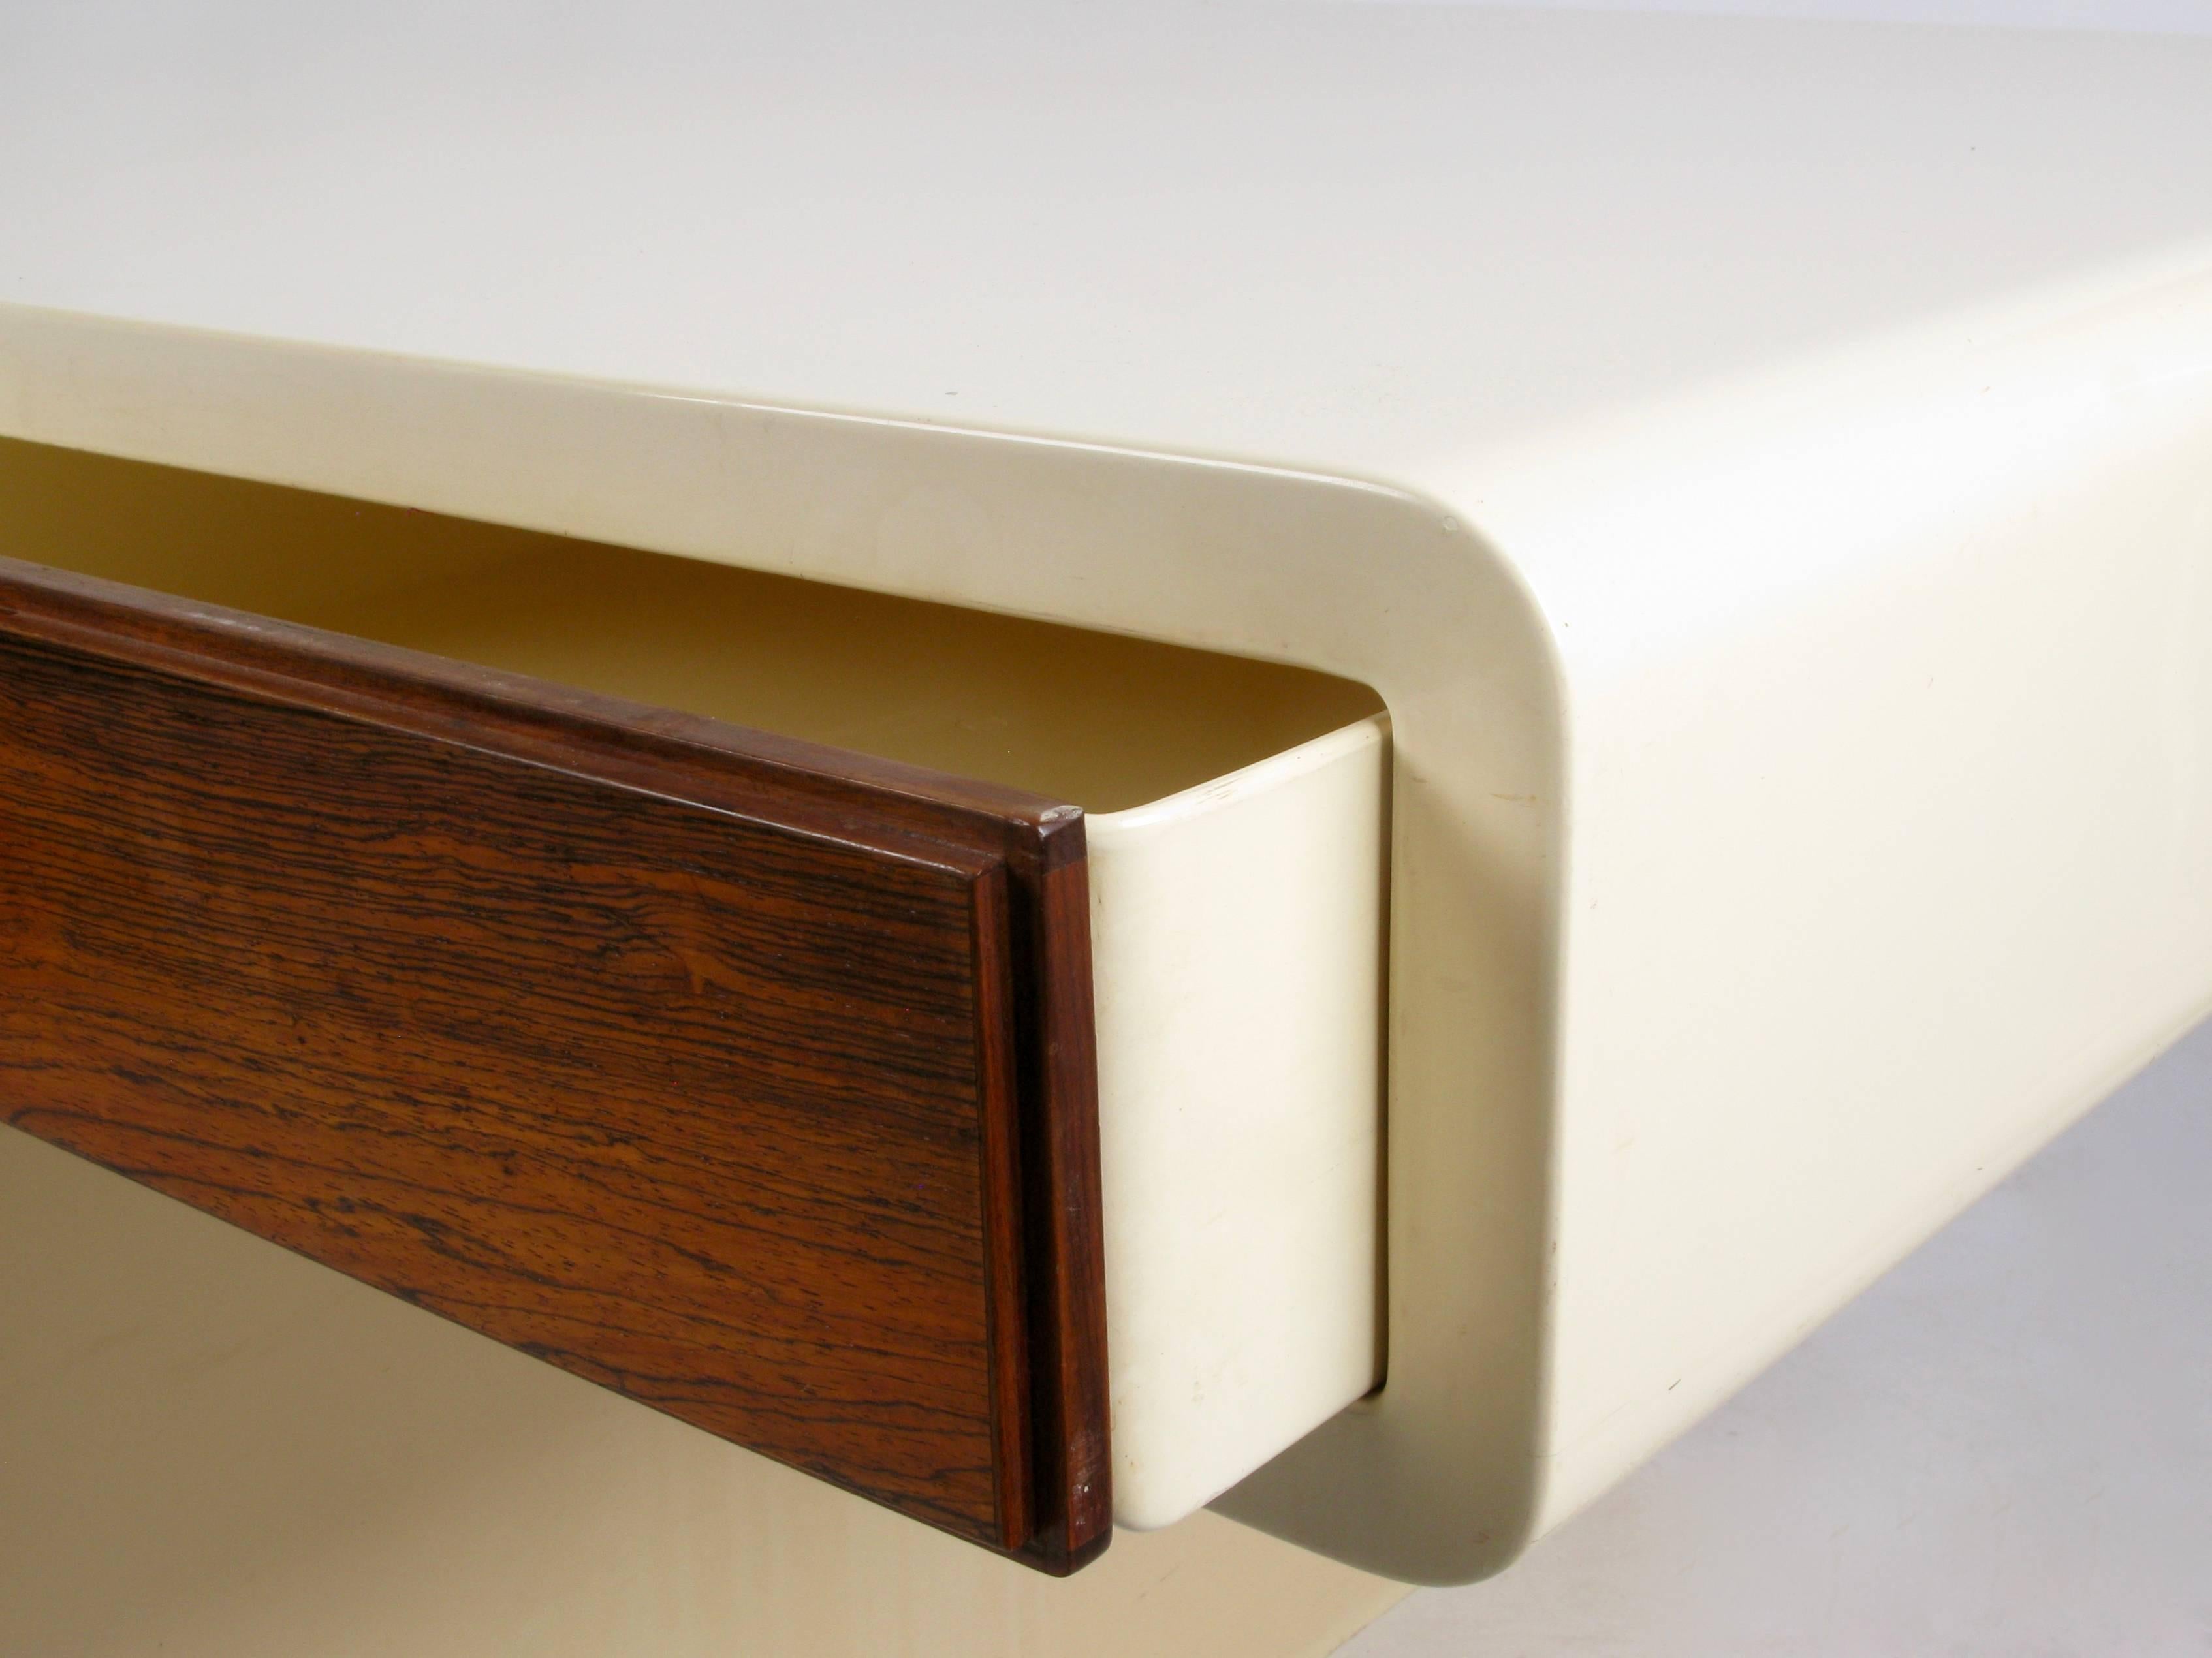 Large 1970s fiberglass coated cast resin desk designed by William Sklaroff for Vectra. The lacquered finish has aged beautifully from the original white to a warm ivory. Two rosewood fronted drawers on one side and a recessed rosewood panel across